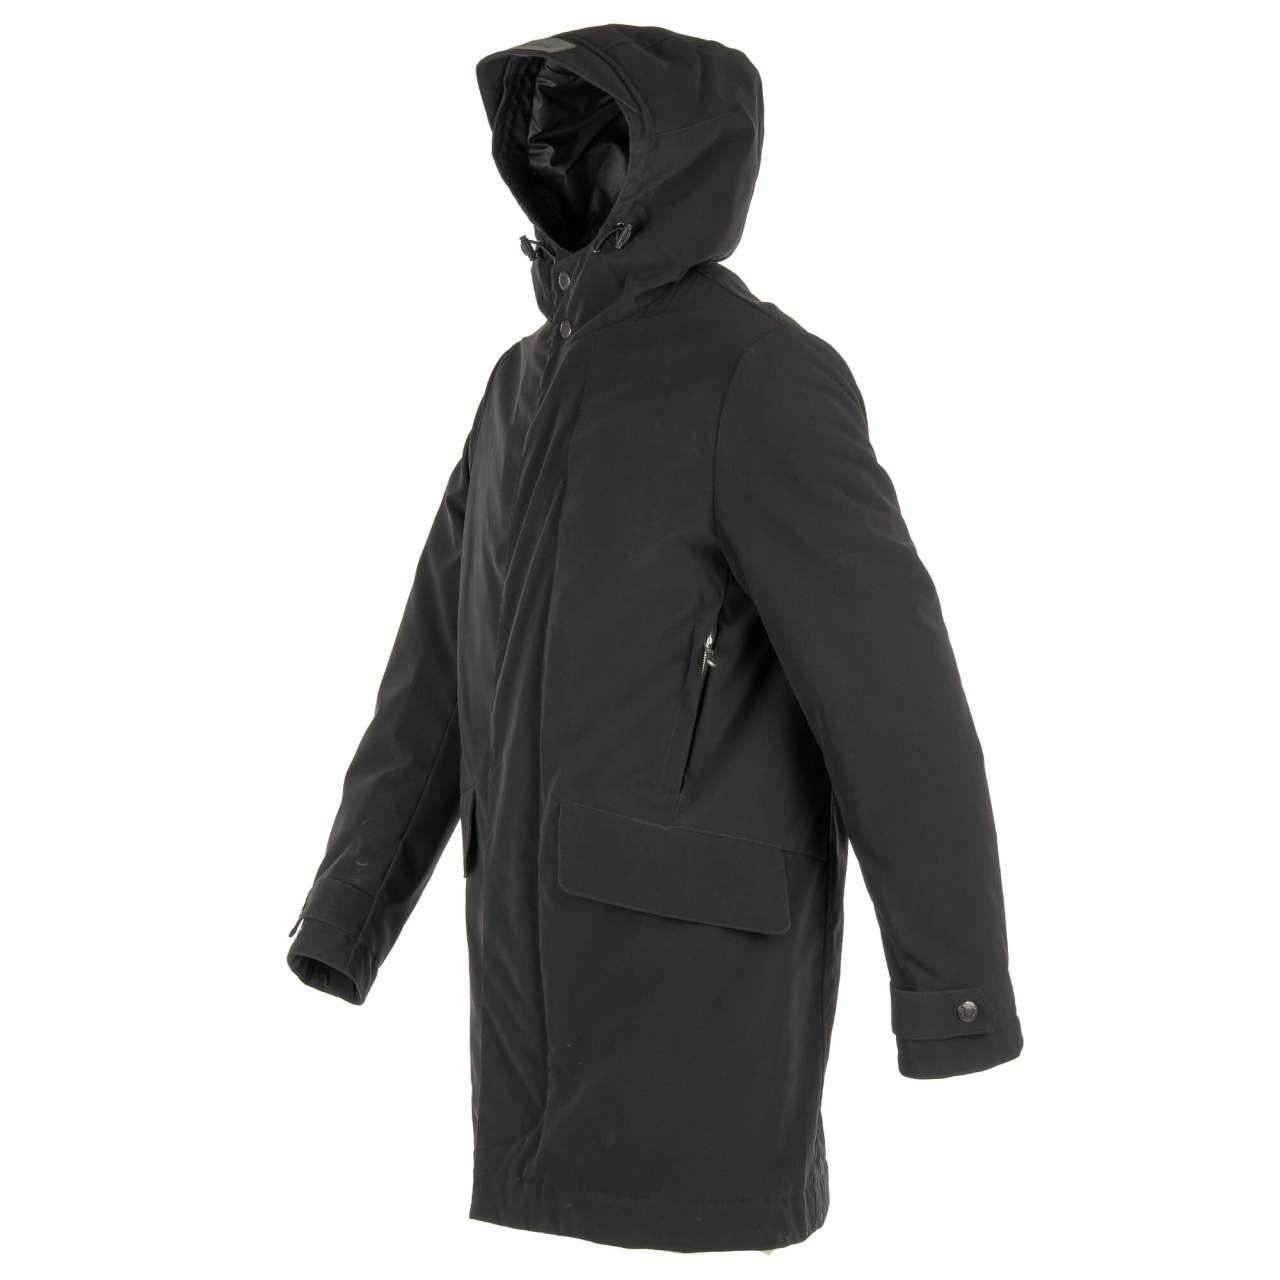 Dolce & Gabbana Classic Hooded Parka Jacket with Pockets and Logo Black 46 S In Excellent Condition For Sale In Erkrath, DE